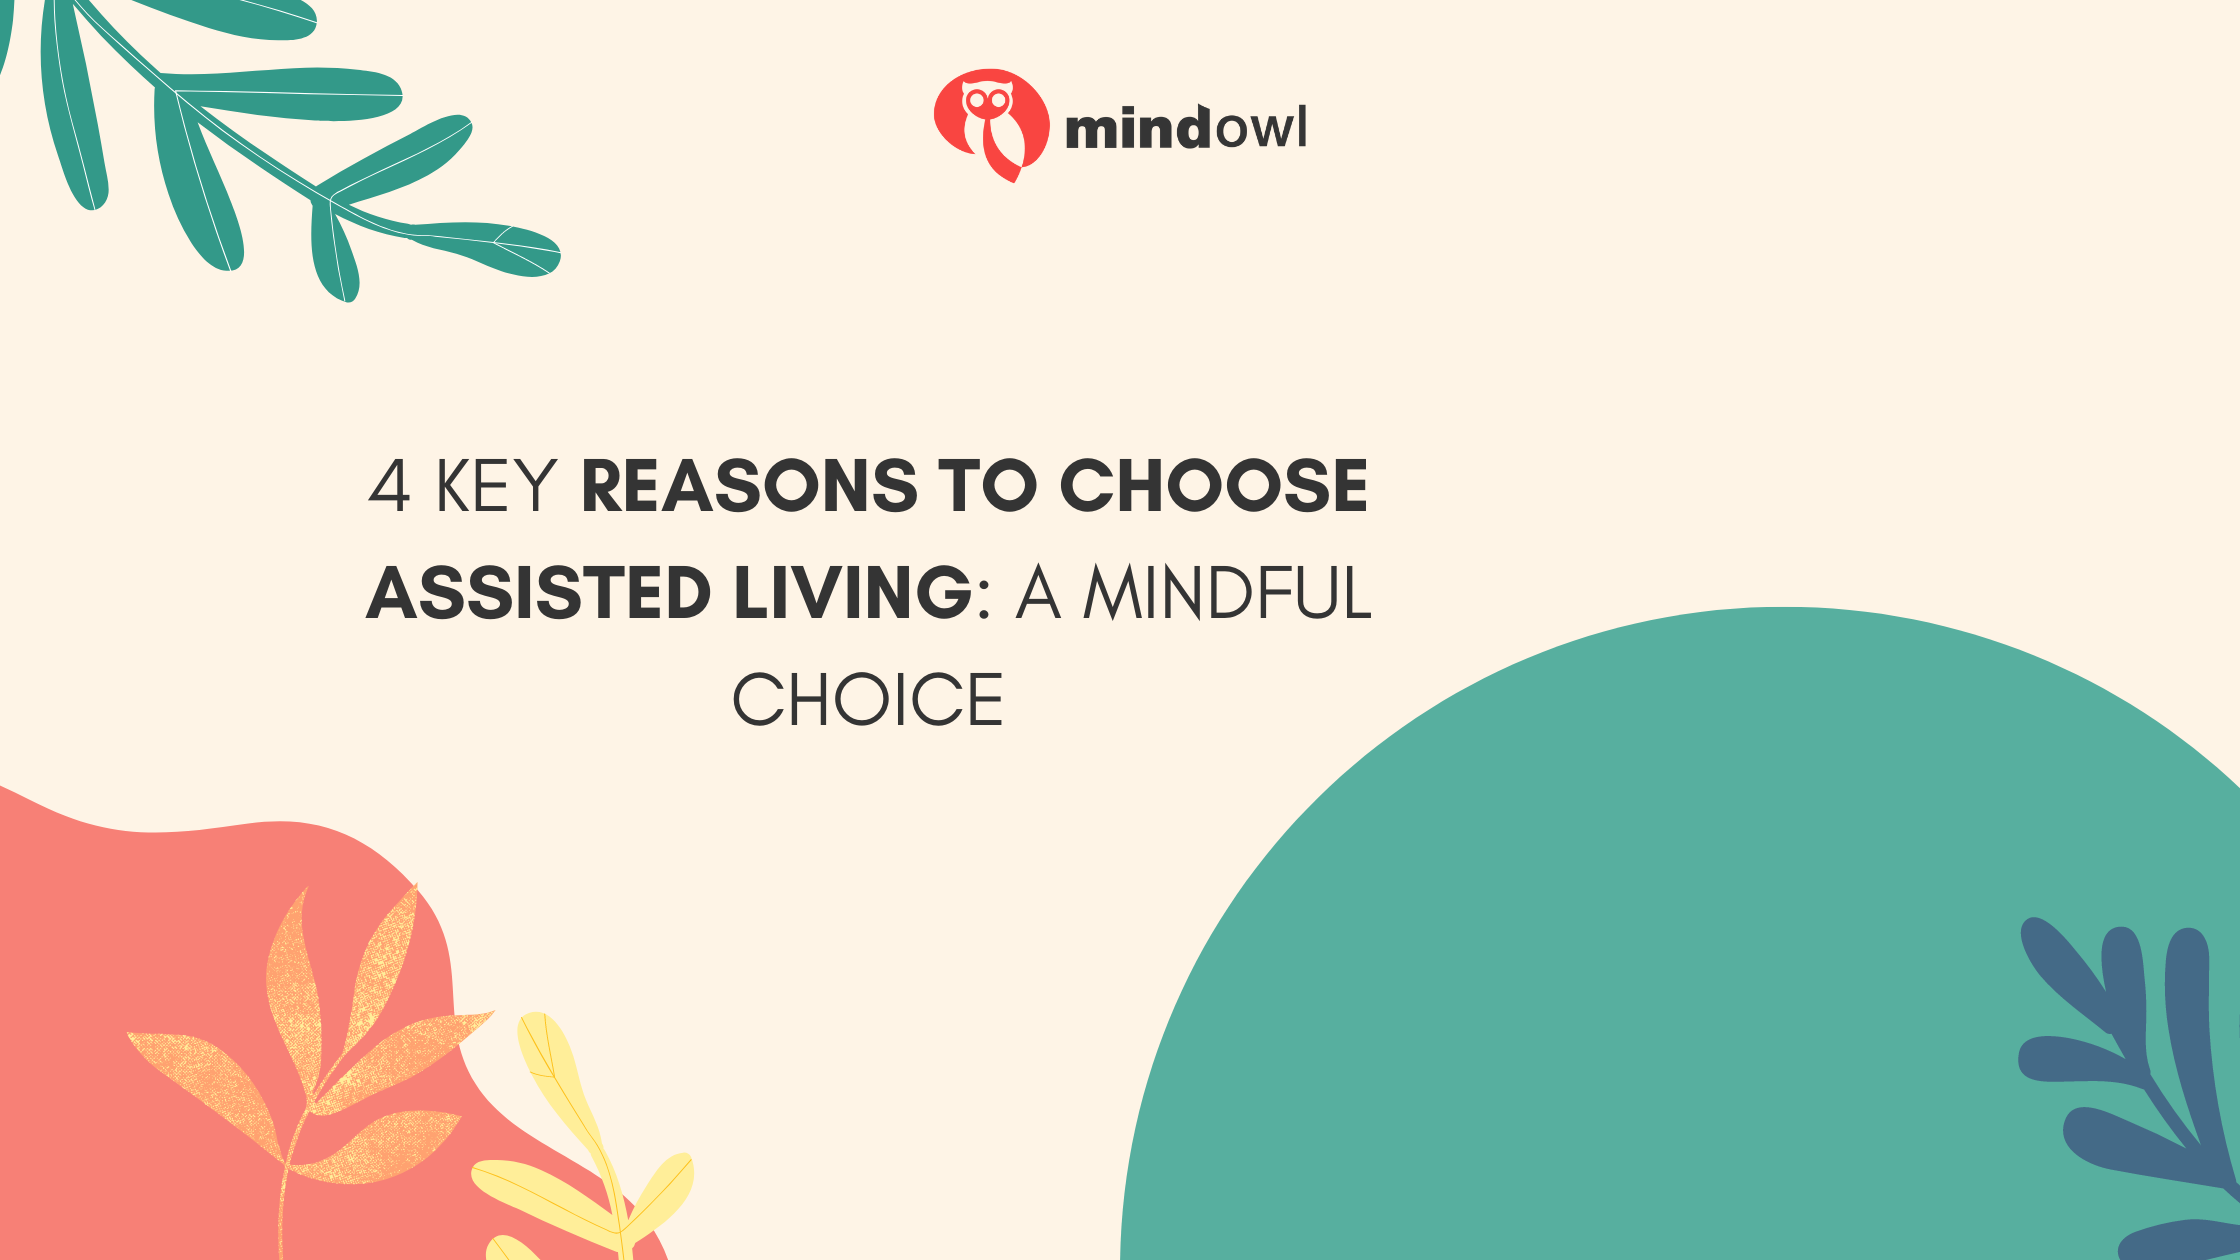 4 Key Reasons to Choose Assisted Living: A Mindful Choice